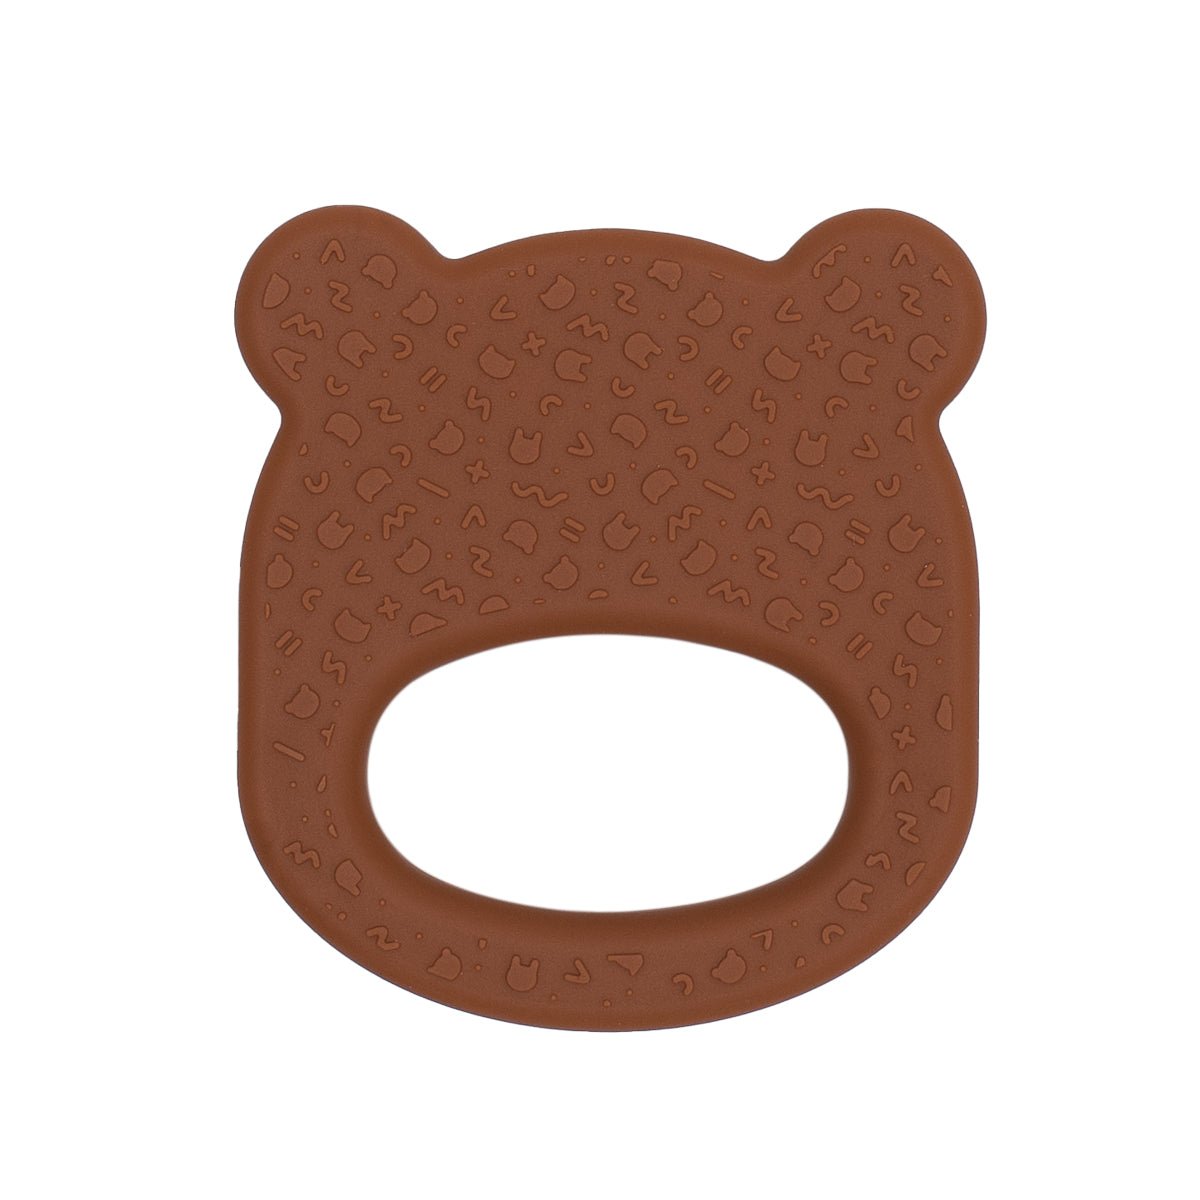 Our silicone bear teething ring in chocolate brown